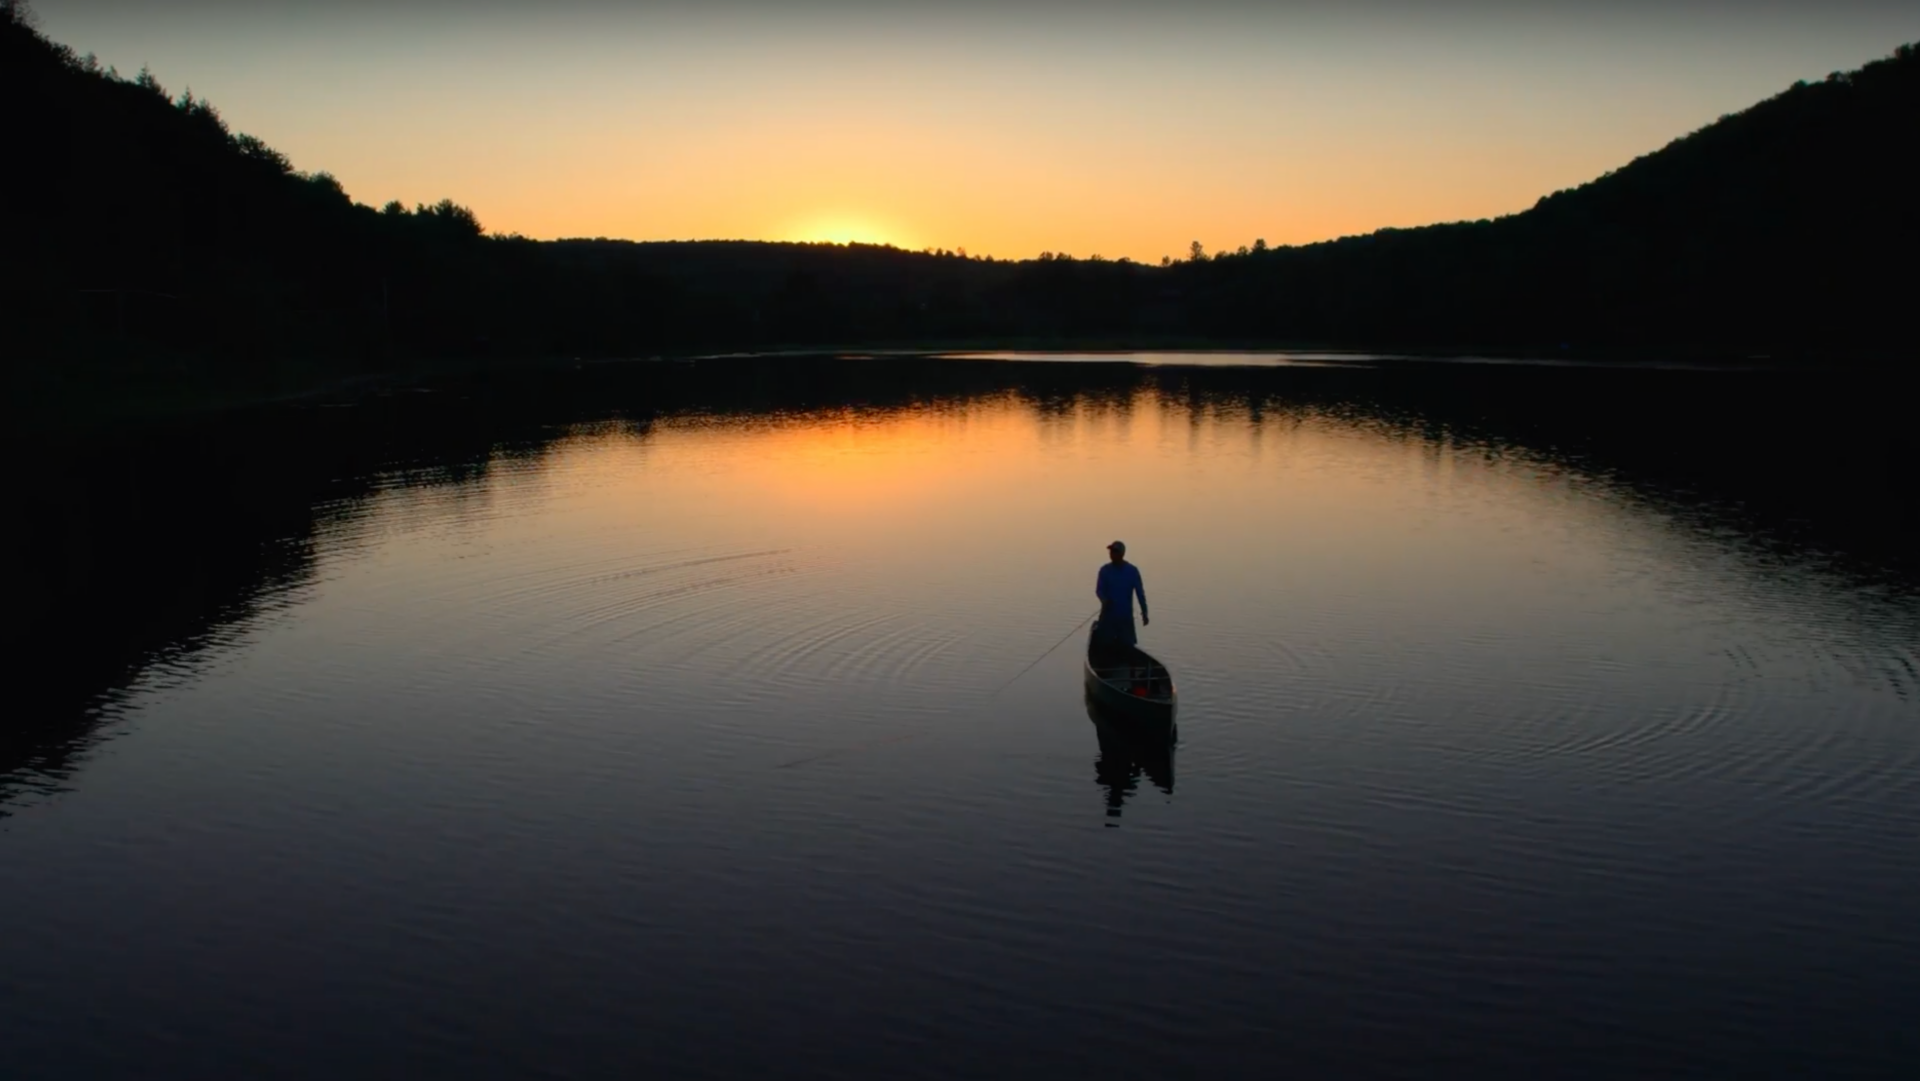 An aerial view of a man fishing in a lake at sunset.